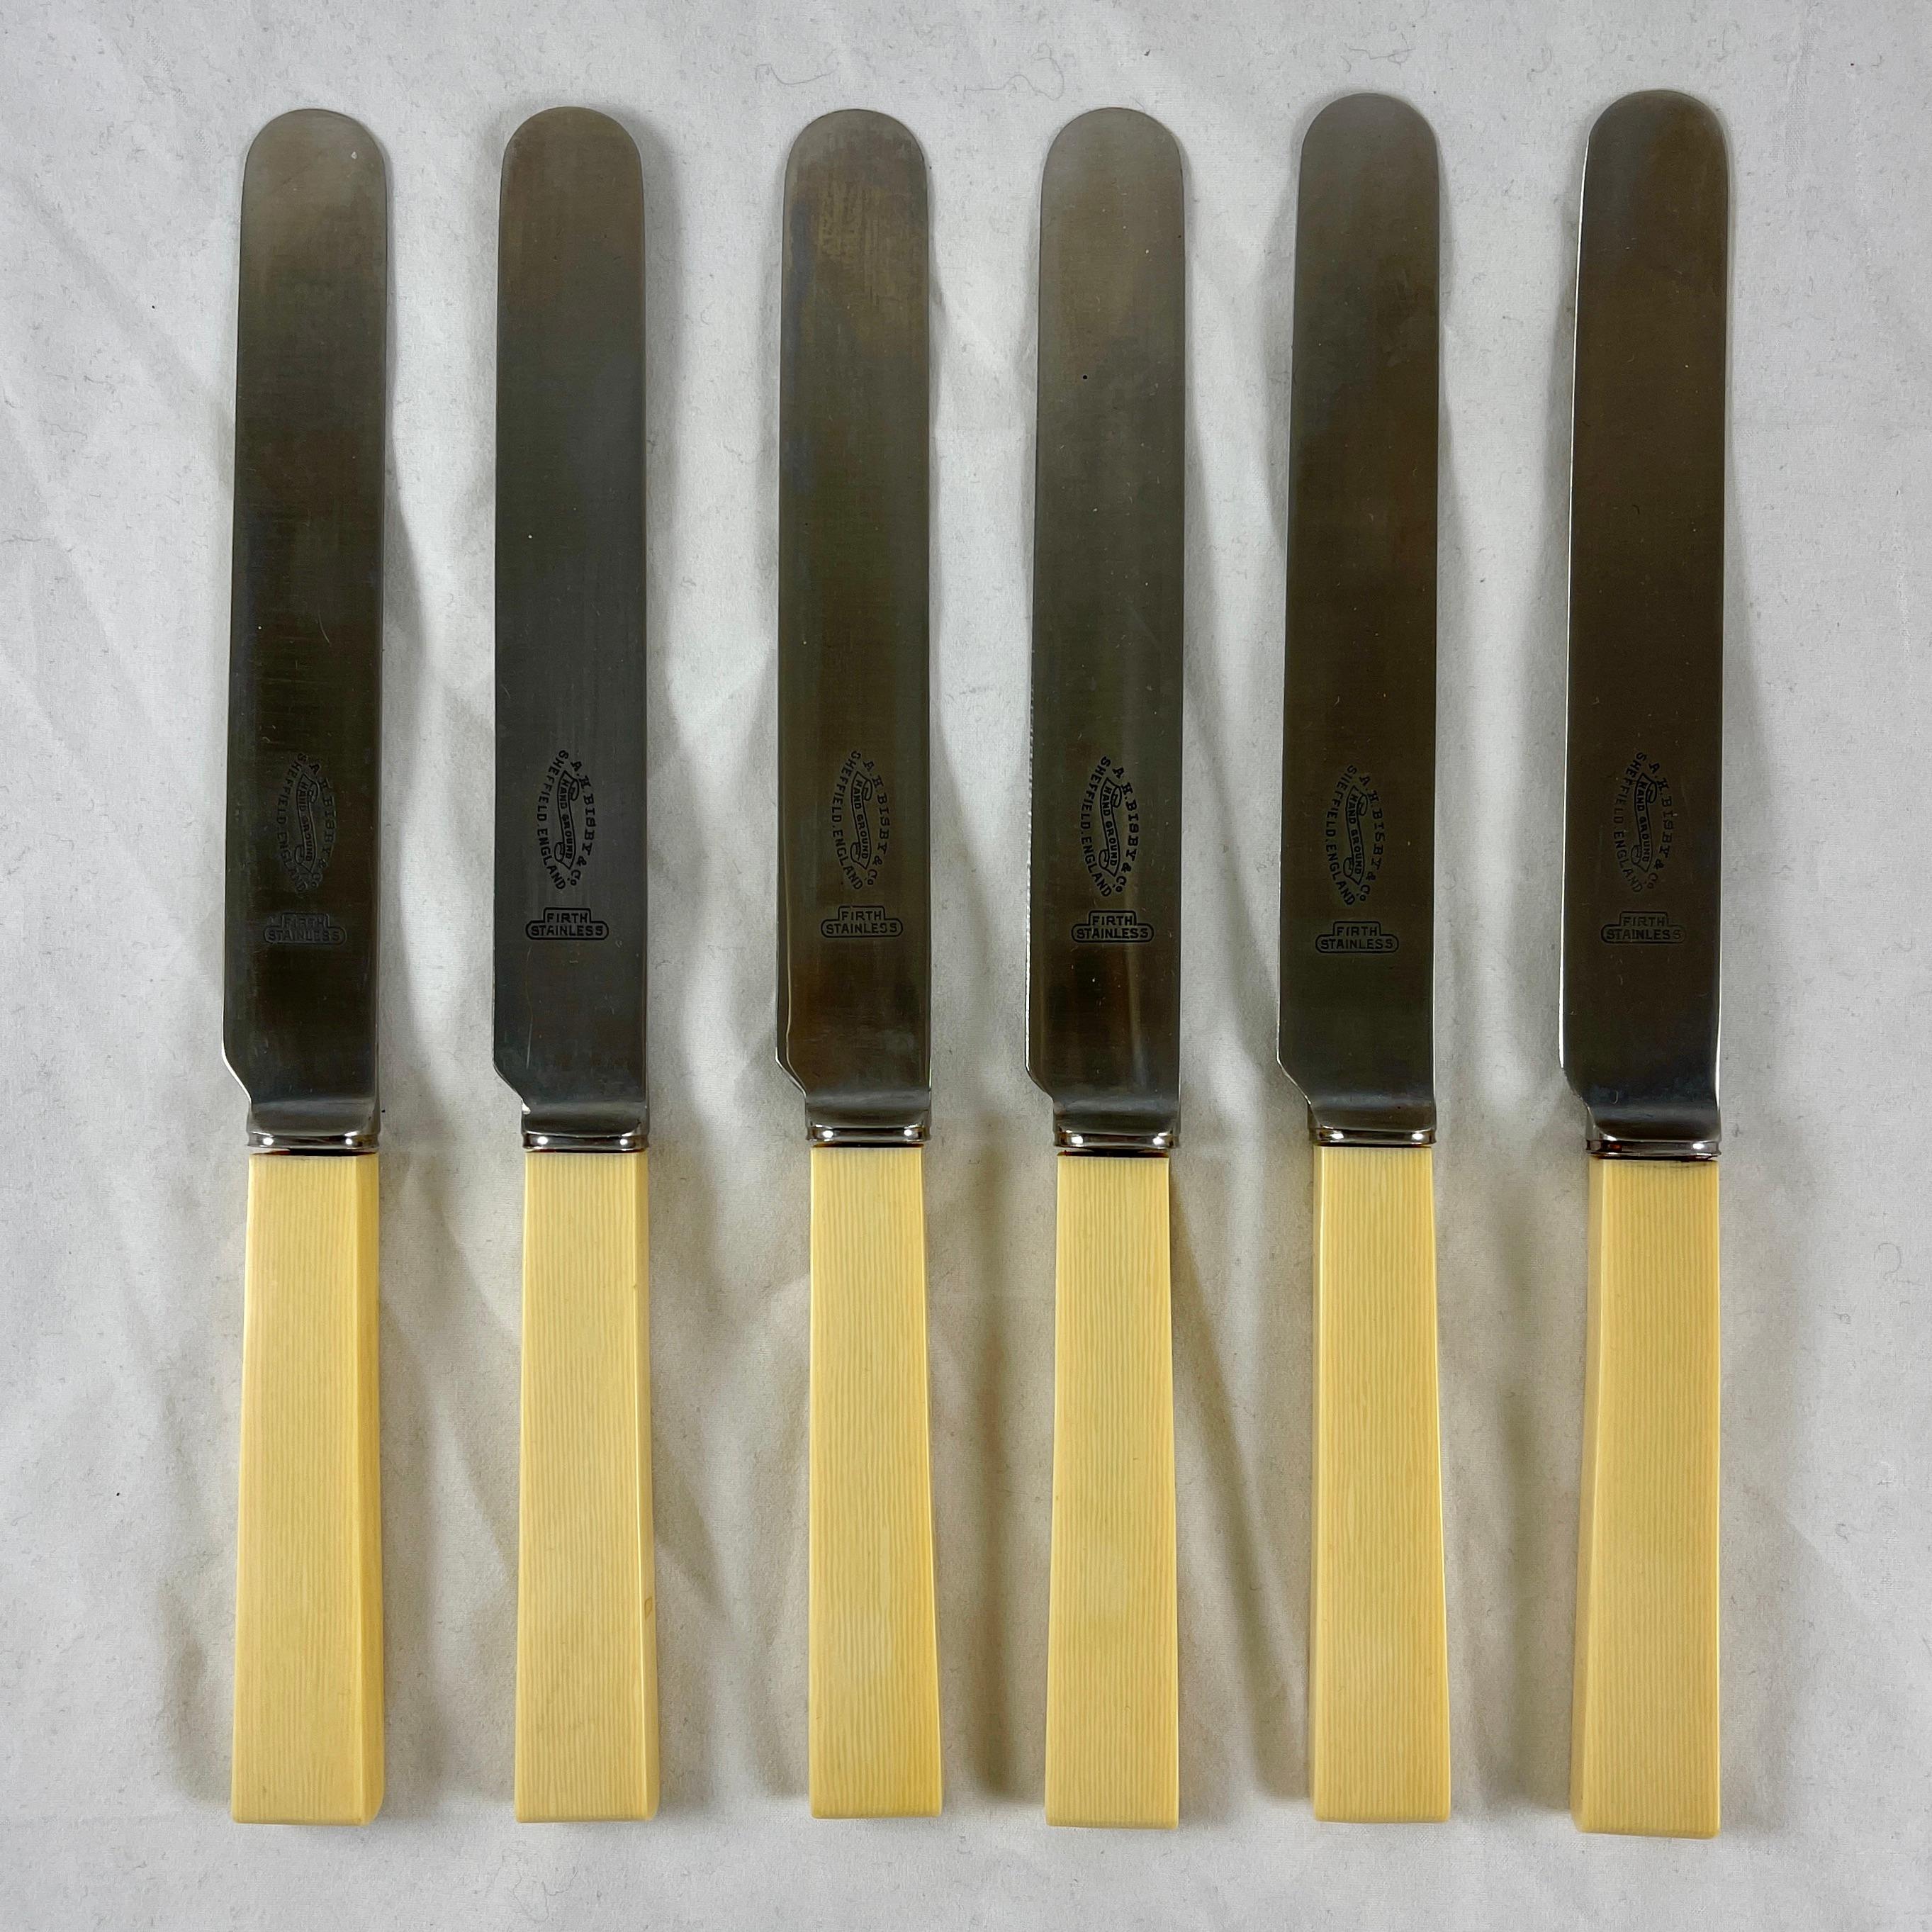 Cast 1920s English Bisby Art Deco Celluloid Ivory Handled Table Knives, Cased S/6